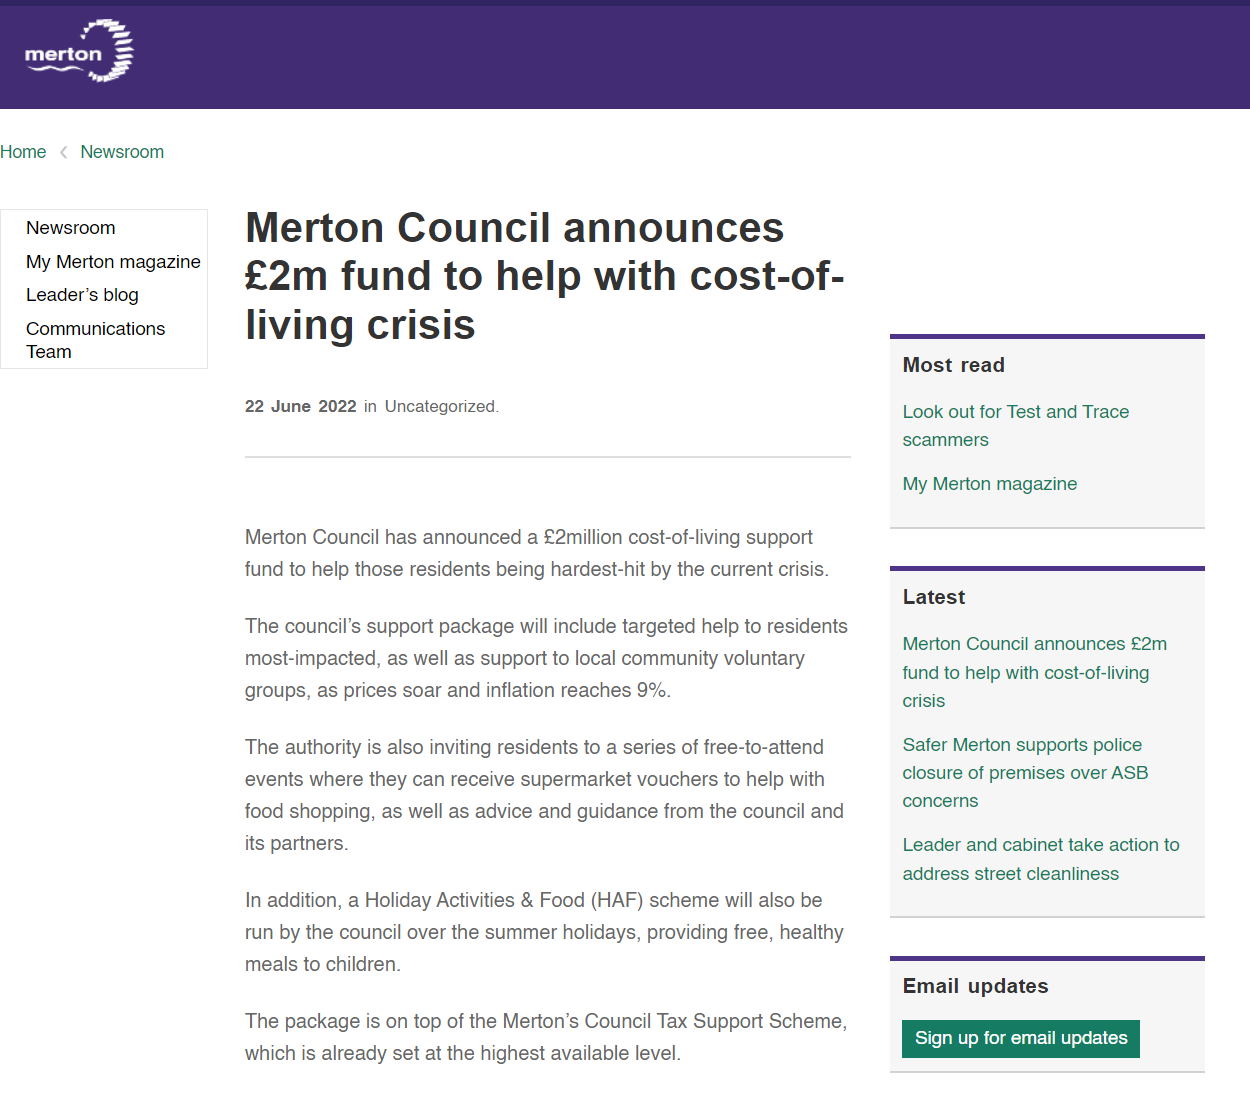 Merton Council announces £2m fund to help with cost-of-living crisis